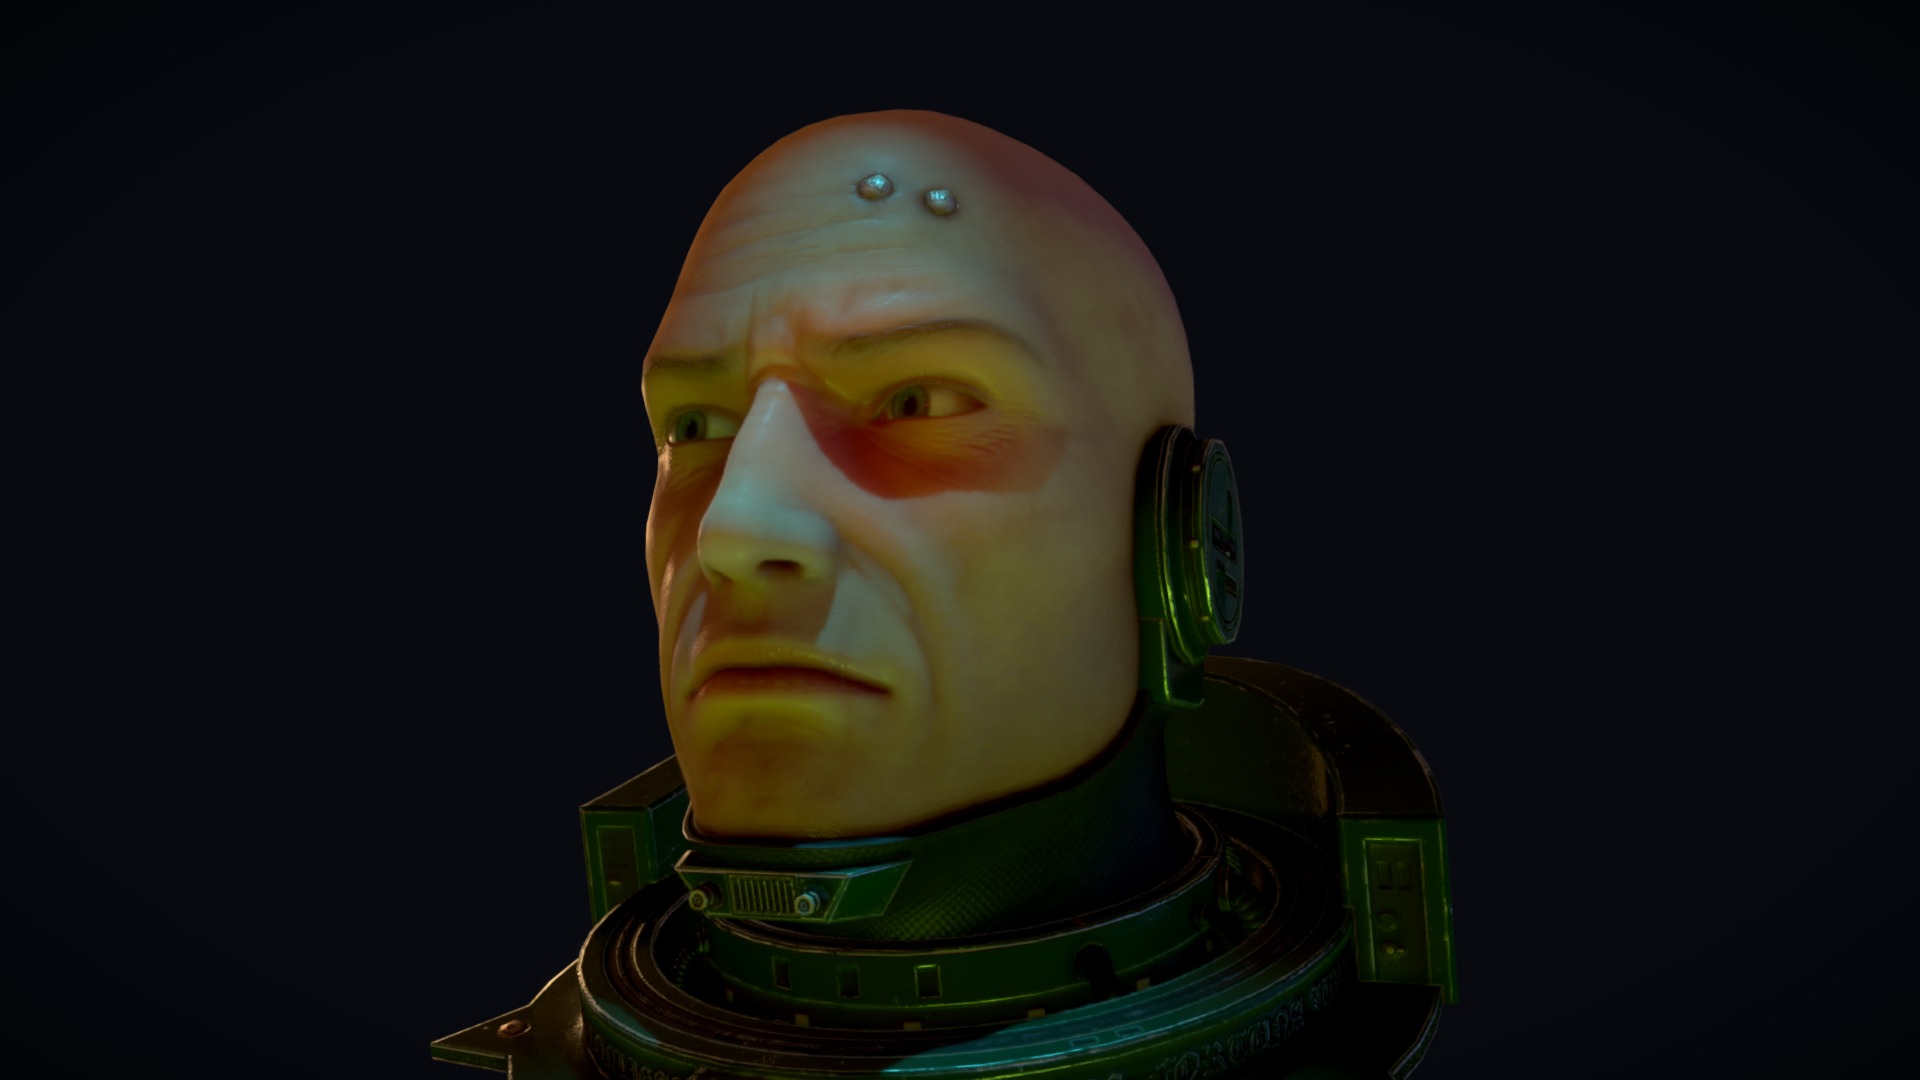 Space Marine Head from W40K universe.

V0.5

PBR Metalness workflow with custom F0 maps for better dielectrics reflectance control. No Sculpt, no cage projection. Painting and flat baking only. Skin Only for now.

V0.75

Now fully textured. New skin details. Enjoy.

V1.0

Now with animation! This is my first animated model on Sketchfab. Works really fine.

See the full project on Artstation : https://www.artstation.com/artwork/rOOaL - Space Marine Head [Animated - PBR] - 3D model by TOURNERY-BACHEL Thibaud (@Asadar) 3d model